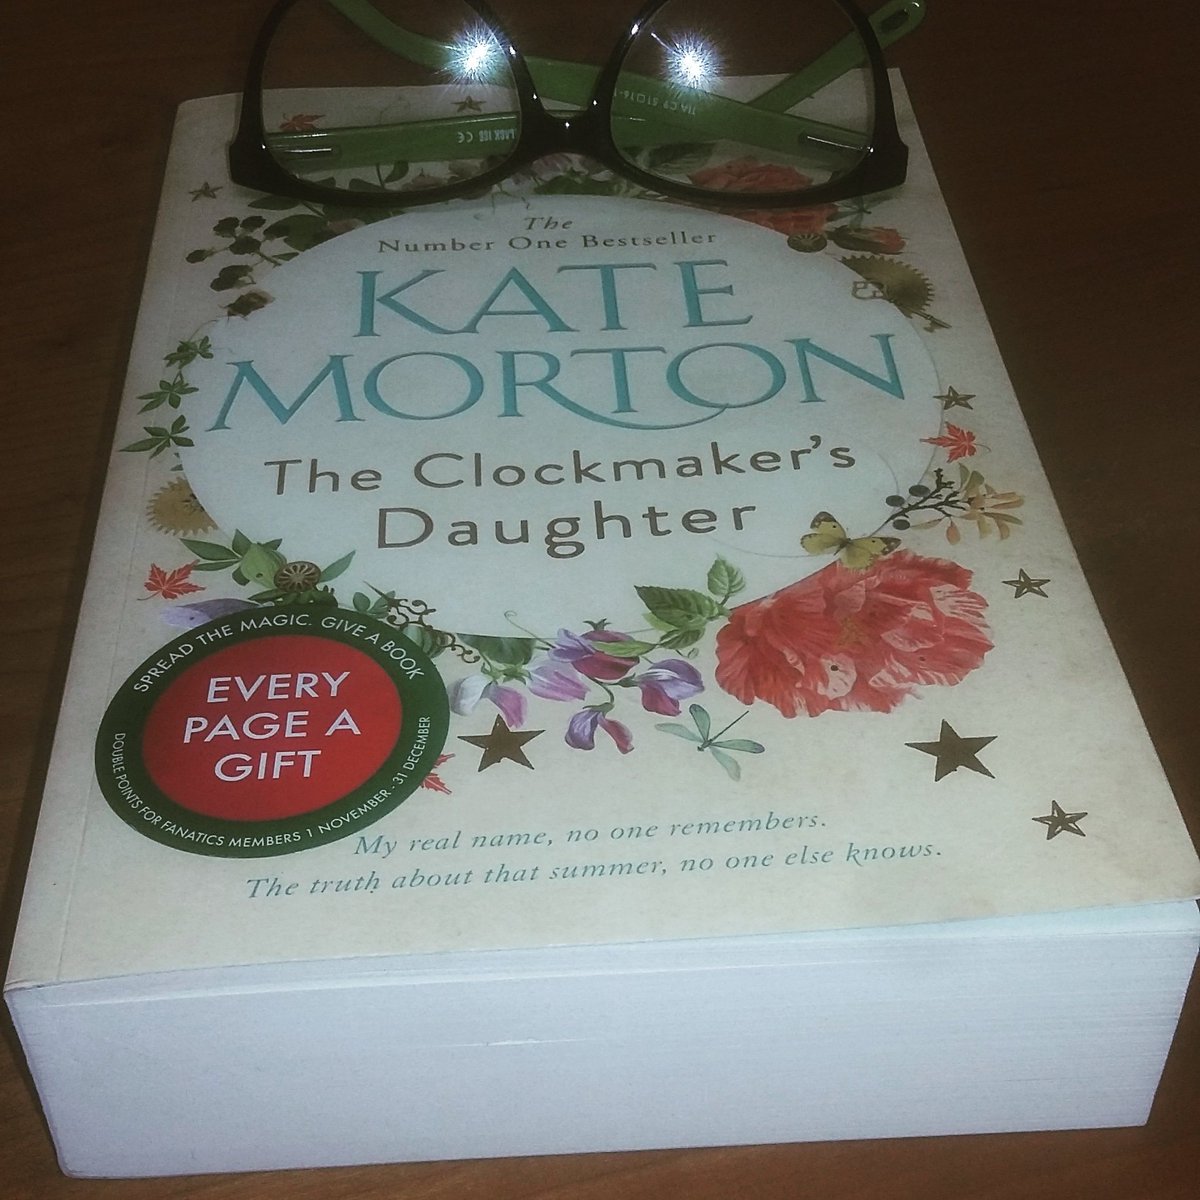 Almost 600 pages. But looking forward to this bestselling novel by Kate Morton.